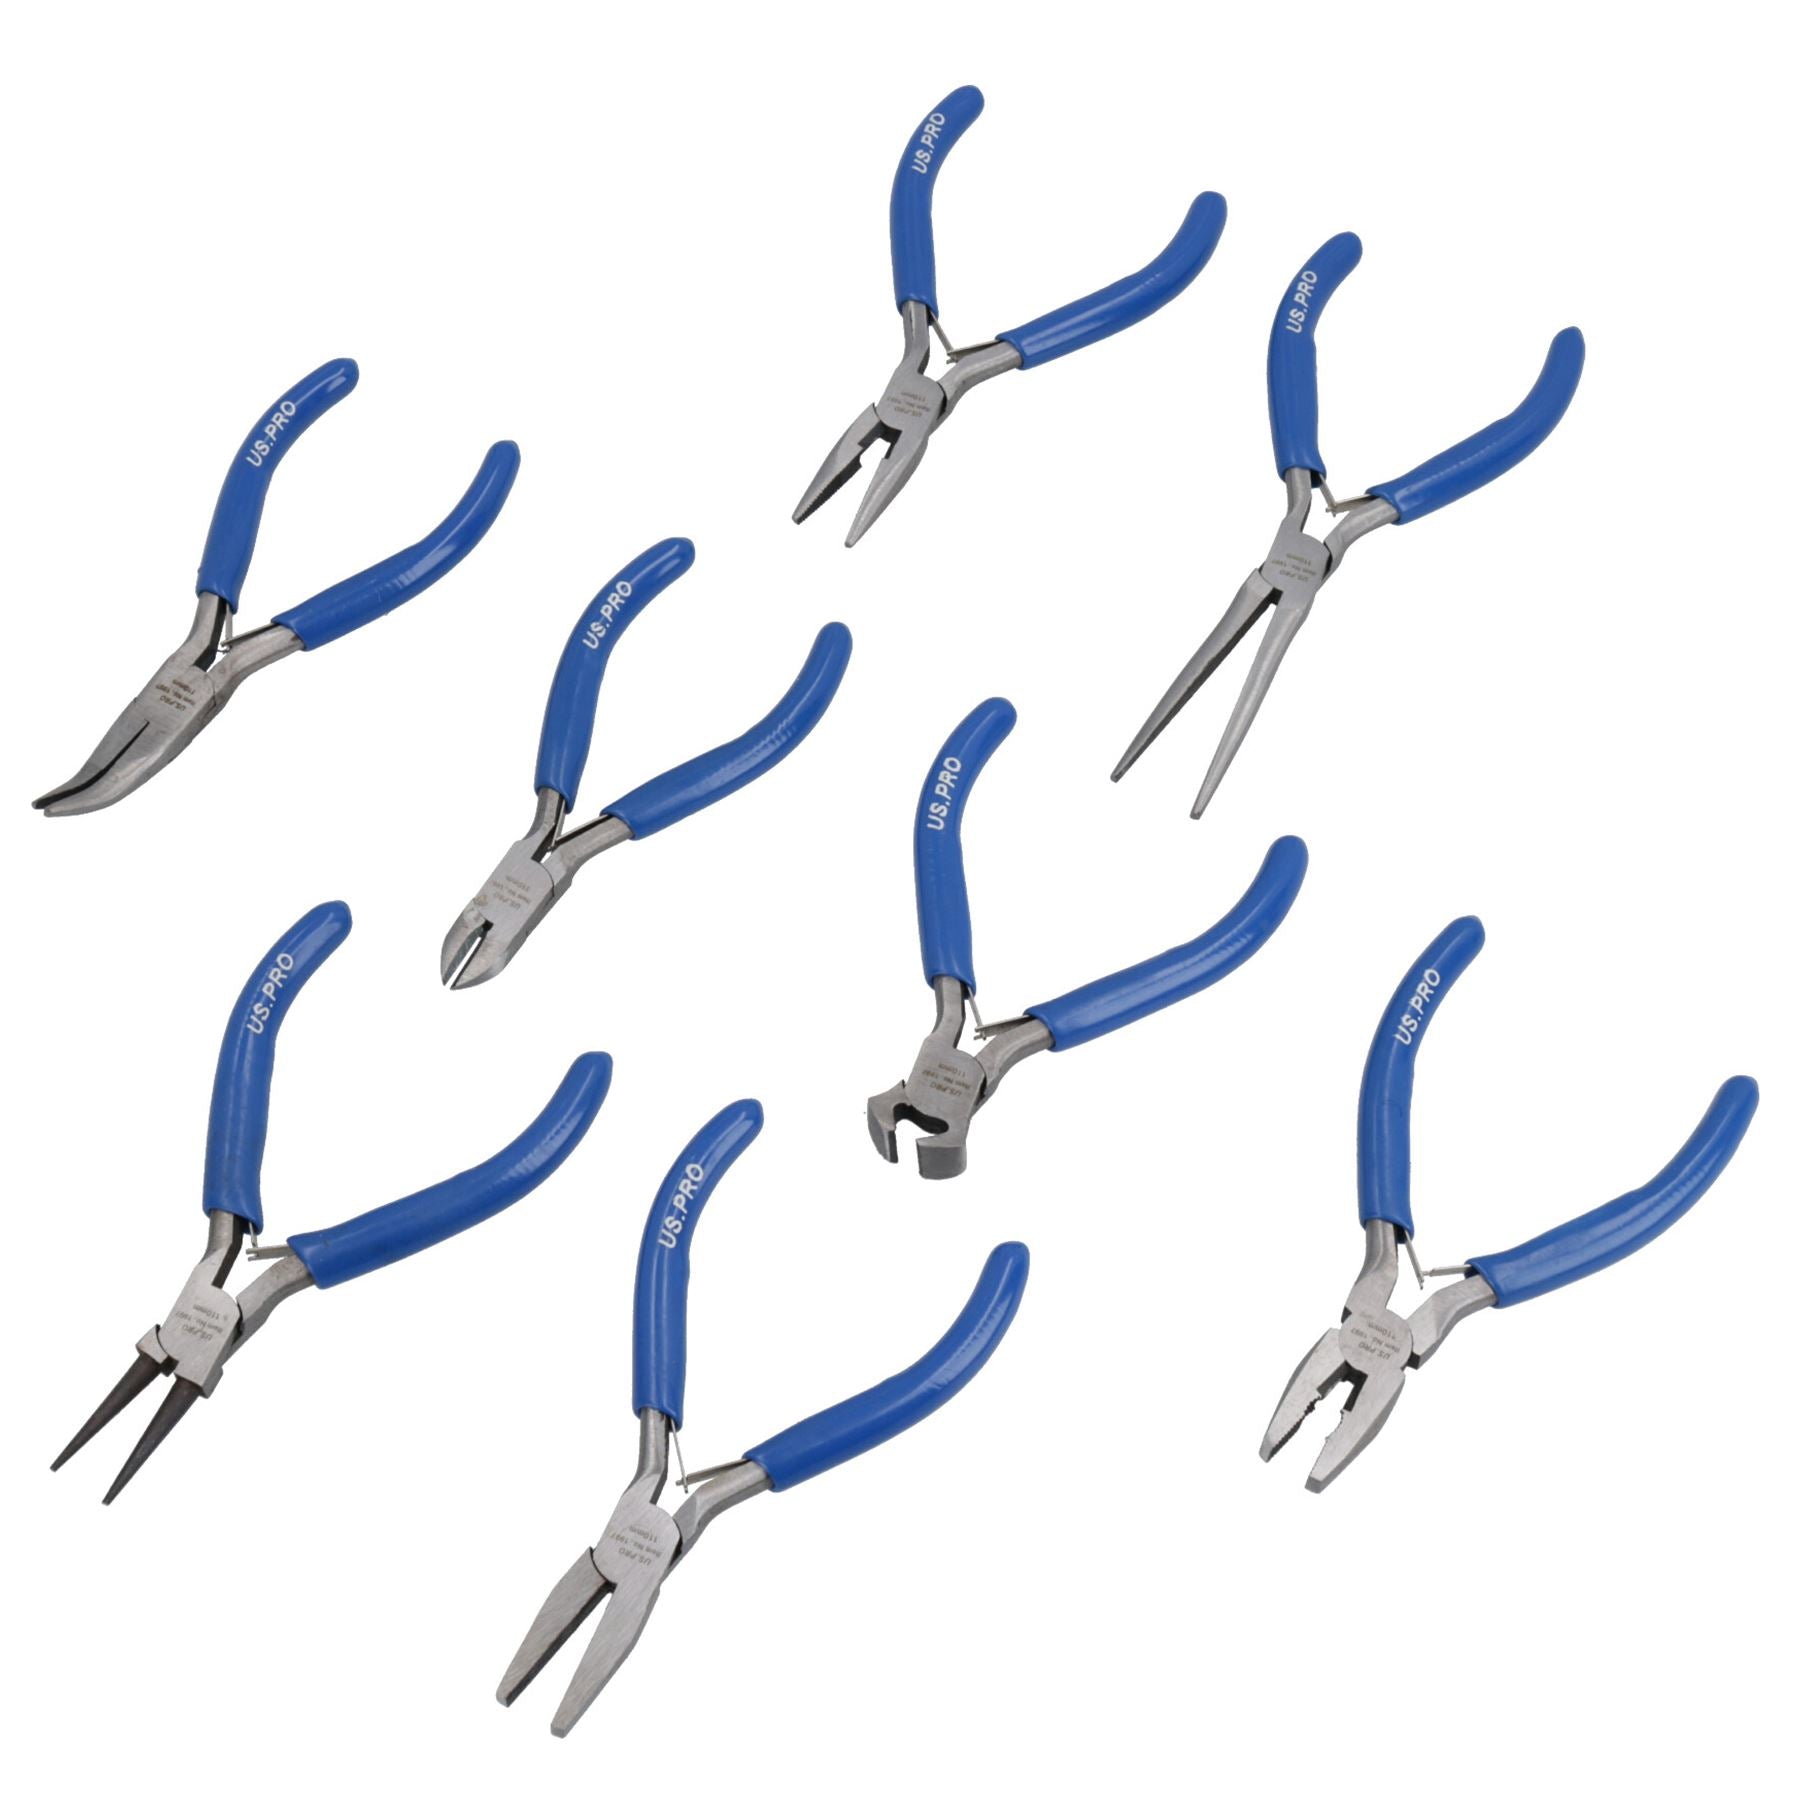 Mini Plier Set Craft Jewellery Making Cutters Long Nose Circlips Engineers 8pc Set